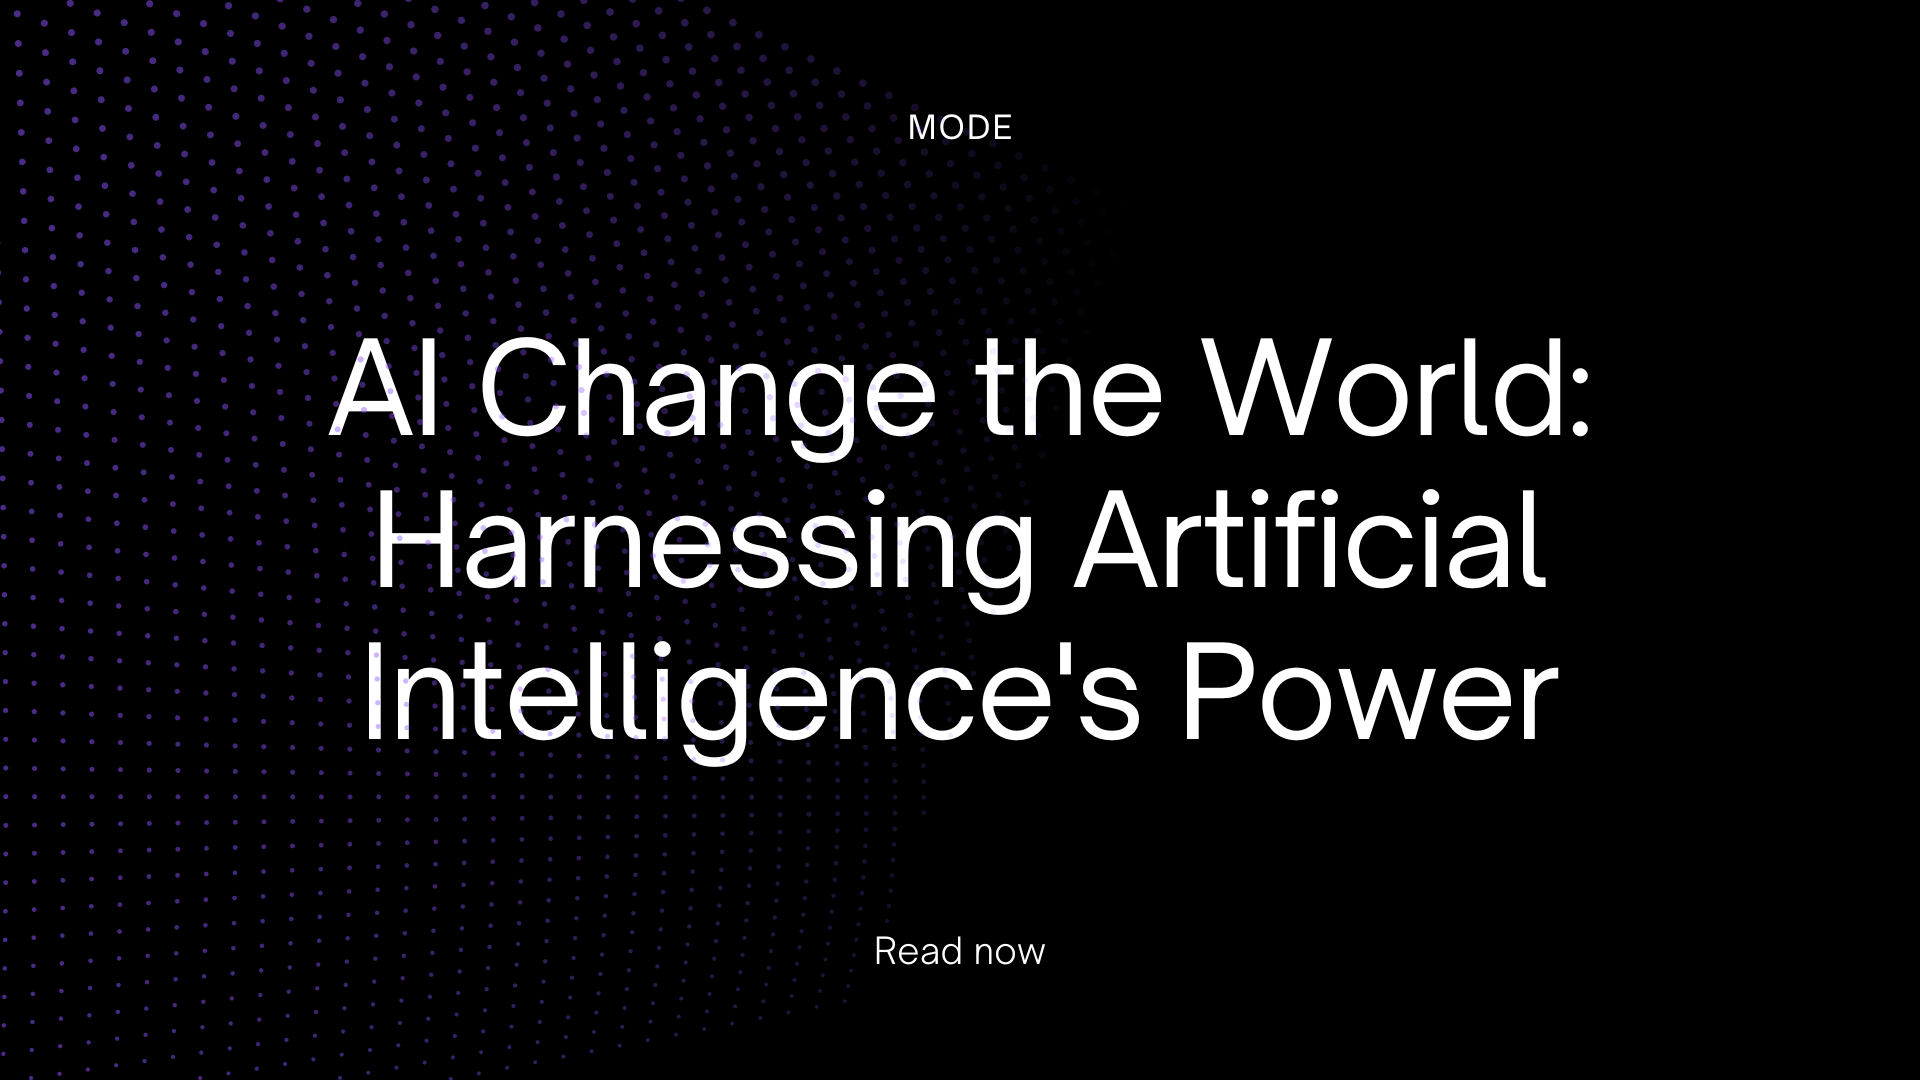 AI Change the World: Harnessing Artificial Intelligence's Power